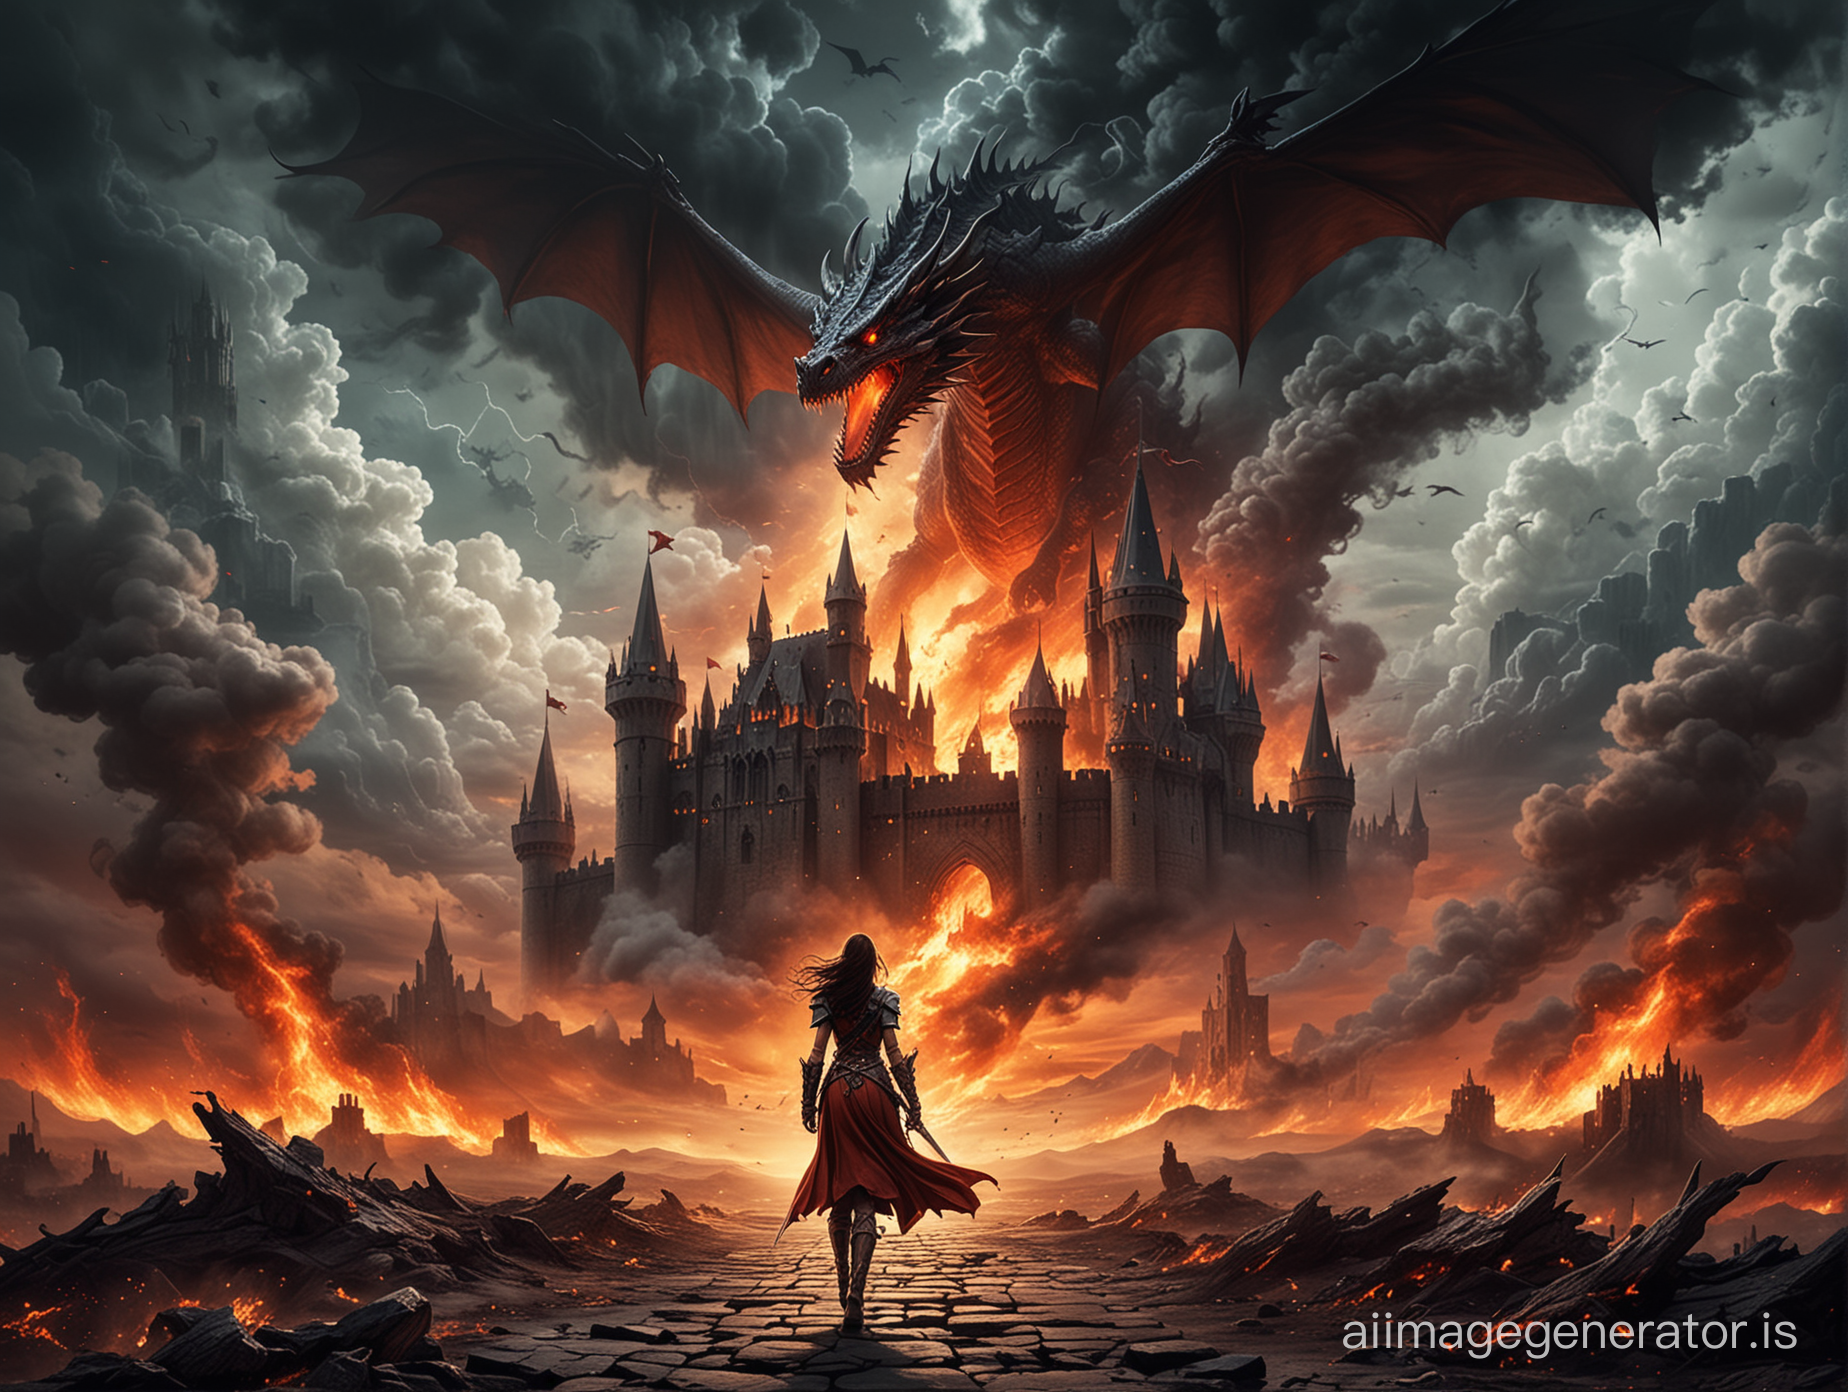 Warrior woman walking away from a burning castlevania inspired castle storm clouds and a dragon
